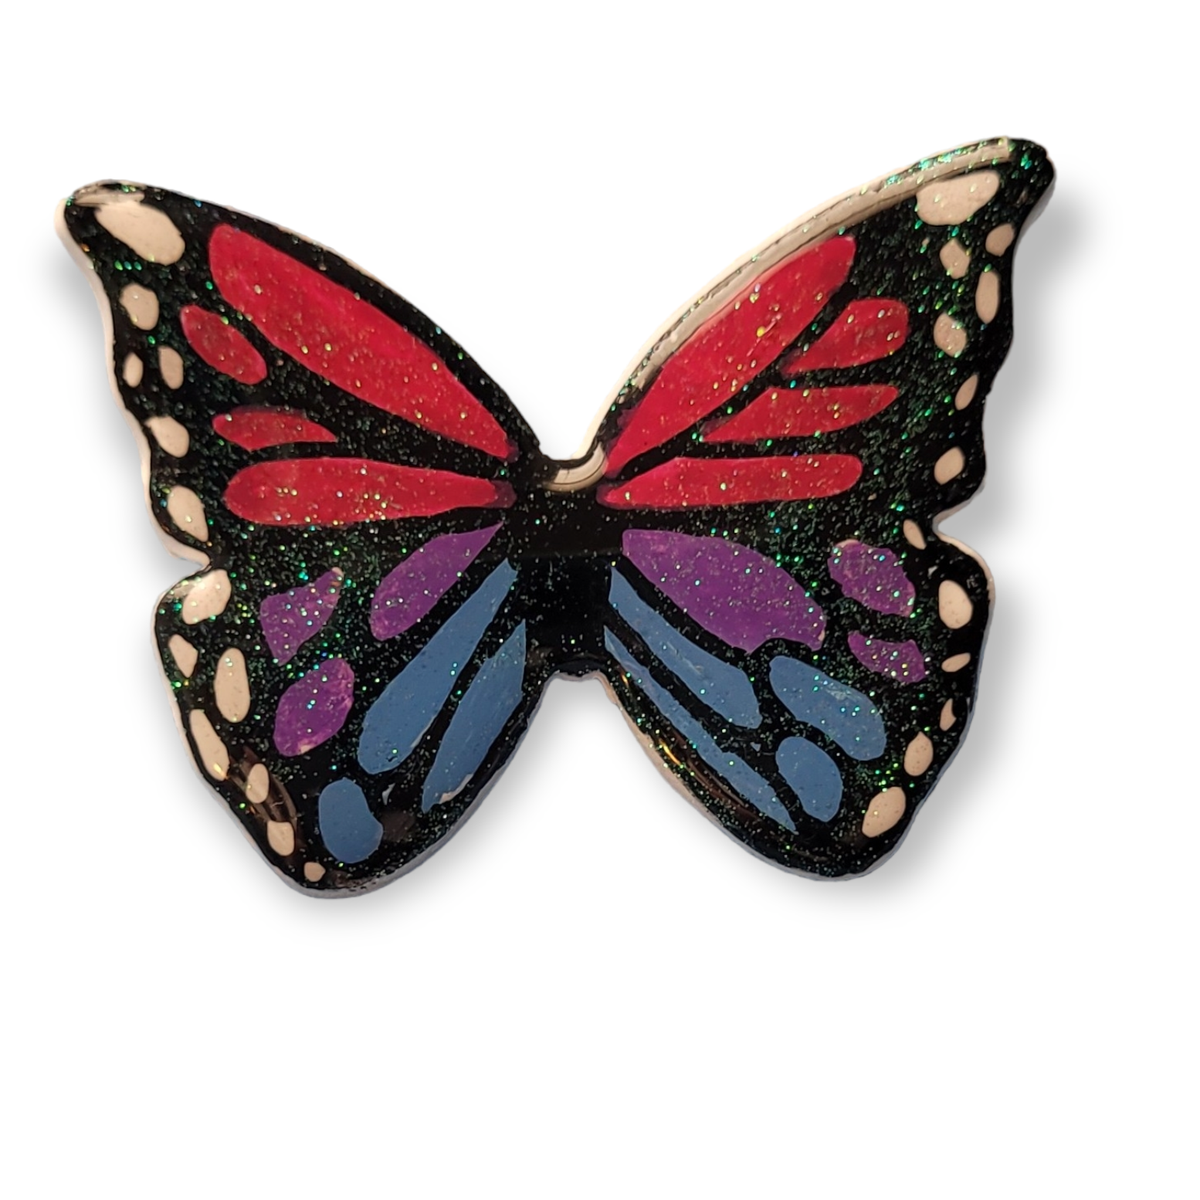 The Crafty Queer LGBTQ+ Butterfly Pride Pins Abrosexual / Glitter